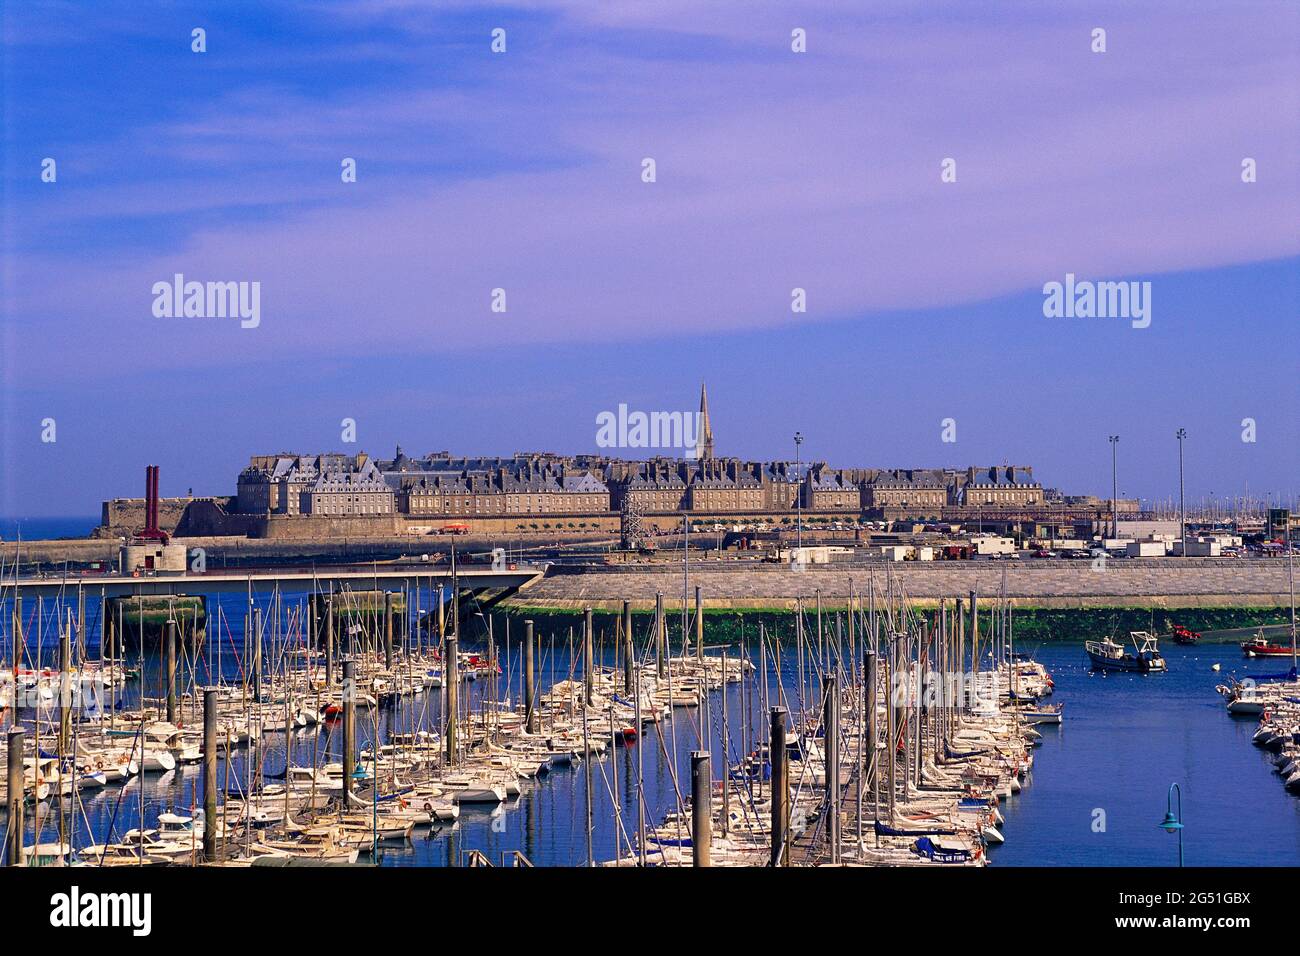 View of harbor under blue sky, Saint-Malo, Brittany, France Stock Photo